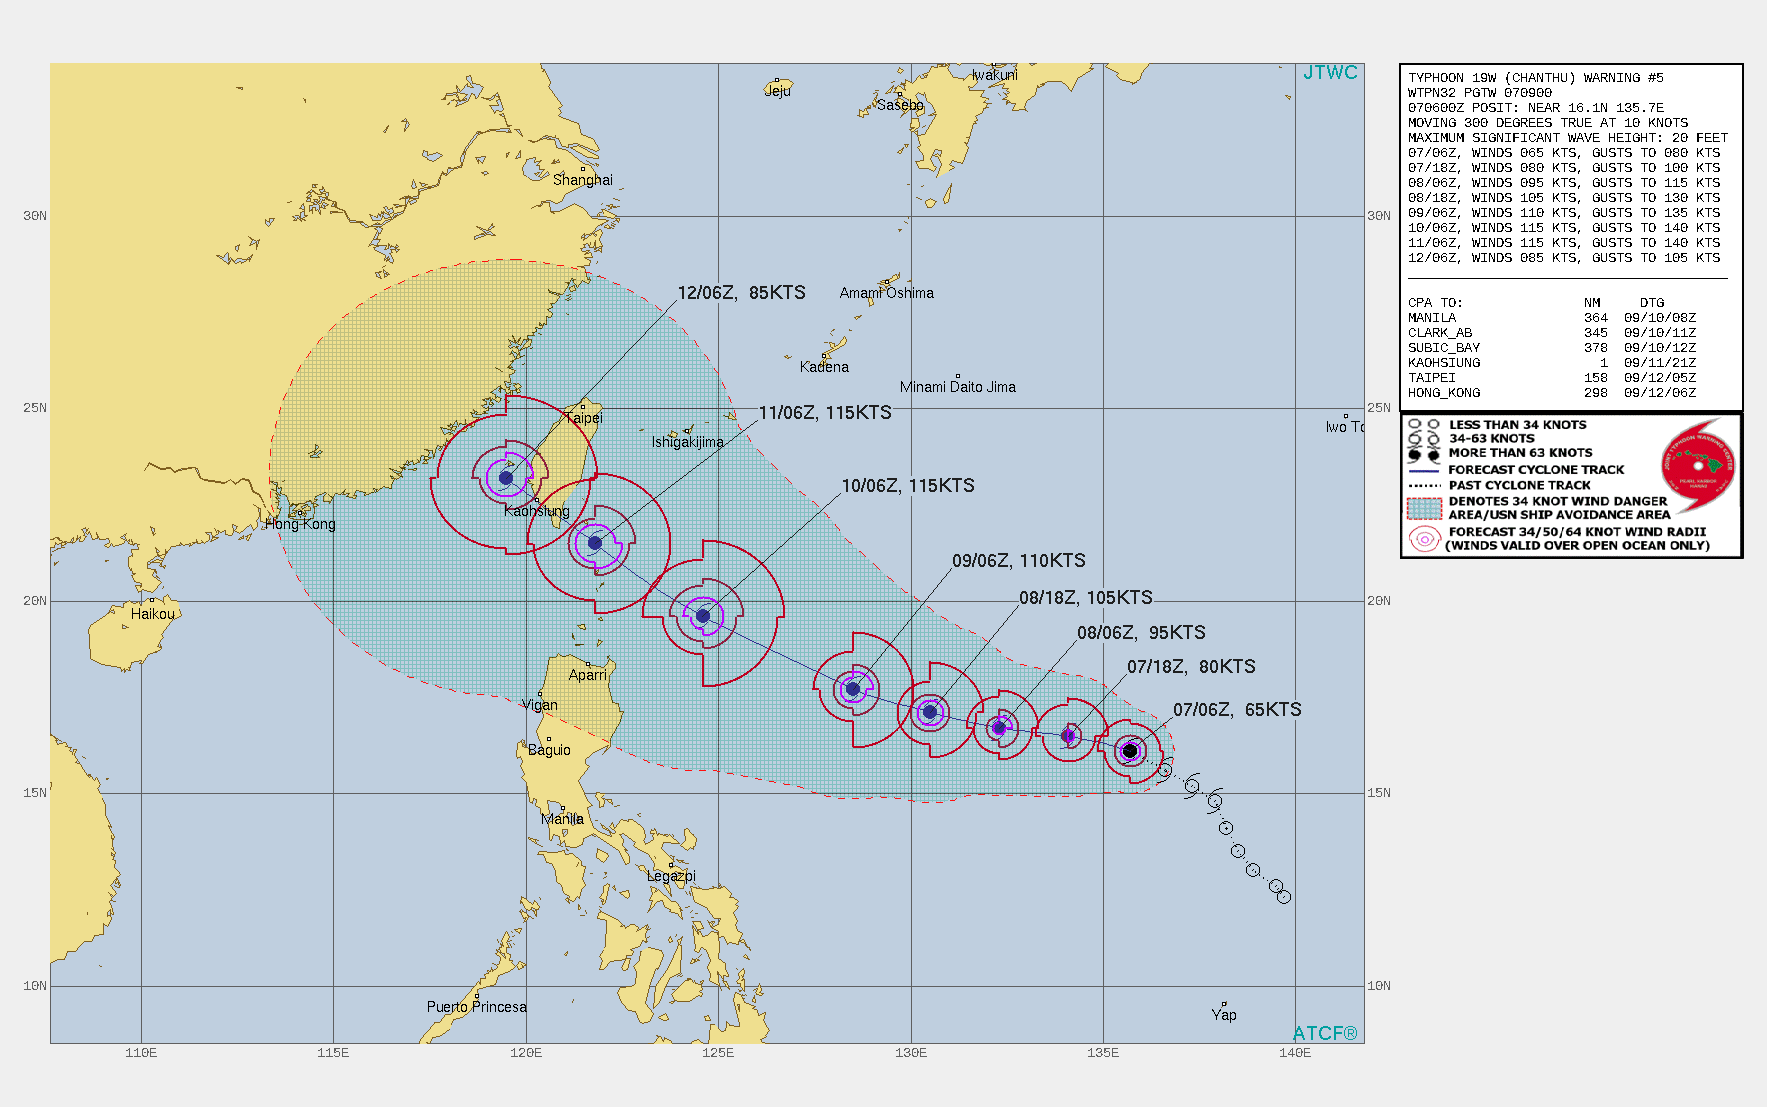 TY 19W(CHANTHU). WARNING 6 ISSUED AT 07/09UTC.SIGNIFICANT FORECAST CHANGES: THERE ARE NO SIGNIFICANT CHANGES TO THE FORECAST FROM THE PREVIOUS WARNING.  FORECAST DISCUSSION: TY 19W IS FORECAST TO CONTINUE TRACKING WEST-NORTHWESTWARD THROUGH T48H ALONG THE SOUTHERN PERIPHERY OF THE DEEP SUBTROPICAL RIDGE(STR) CENTERED TO THE NORTH. GLOBAL MODEL FIELDS INDICATE THAT BY AROUND 48H THE RIDGE TO THE NORTH WILL BEGIN TO WEAKEN SLIGHTLY, ERODED BY THE TRANSIT OF A MINOR SHORTWAVE TROUGH, WHILE THE STR CENTER WILL MOVE EAST AND THE WESTERN PERIPHERY OF THIS RIDGE WILL REORIENT TO A NORTH-SOUTH AXIS. THE NET RESULT FOR TY 19W WILL BE A GRADUAL TURN POLEWARD TOWARDS THE COAST OF SOUTHERN TAIWAN. THE SYSTEM IS EXPECTED TO MAKE LANDFALL ALONG THE SOUTHERN TIP OF TAIWAN NEAR 96H THEN MOVE INTO THE SOUTHERN TAIWAN STRAIT. TY 19W HAS EXHIBITED DRAMATIC IMPROVEMENTS IN ITS CONVECTIVE STRUCTURE AND IS BEGINNING TO RAPIDLY INTENSIFY. THE RAPID INTENSIFICATION PREDICTION AID (RIPA) HAS CONTINUED TO BE TRIGGERED, PROVIDING INCREASING CONFIDENCE IN THE FORECAST INTENSITIES THROUGH 48H. THE SYSTEM IS NOW FORECAST TO INTENSIFY TO 95 KNOTS/CAT 2 BY 24H AND 115 KNOTS/CAT 4 BY 48H UNDER VERY FAVORABLE ENVIRONMENTAL CONDITIONS OF WARM (30C) SSTS, LOW (5-10 KTS) VERTICAL WIND SHEAR(VWS) AND RADIAL OUTFLOW. AS THE SYSTEM APPROACHES TAIWAN, IT IS EXPECTED TO TAP INTO SOME POLEWARD OUTFLOW, BUT AT THE SAME TIME SSTS ARE FORECAST TO COOL SLIGHTLY WHILE VWS IS FORECAST TO INCREASE. THESE PARAMETERS SHOULD OFFSET ONE ANOTHER, RESULTING IN THE SYSTEM MAINTAINING INTENSITY THROUGH LANDFALL, WITH SIGNIFICANT WEAKENING THEREAFTER AS THE SYSTEM INTERACTS WITH THE RUGGED TERRAIN OF TAIWAN. TROPICAL STORM CONSON (18W) IS LOCATED APPROXIMATELY 1325KM TO THE SOUTHWEST. THE TWO SYSTEMS ARE EXPECTED TO CLOSE TO WITHIN 1050-1090KM AROUND 72H BUT THE PROBABILITY OF BINARY INTERACTION REMAINS LOW DUE TO THE COMPACT NATURE OF BOTH SYSTEMS.